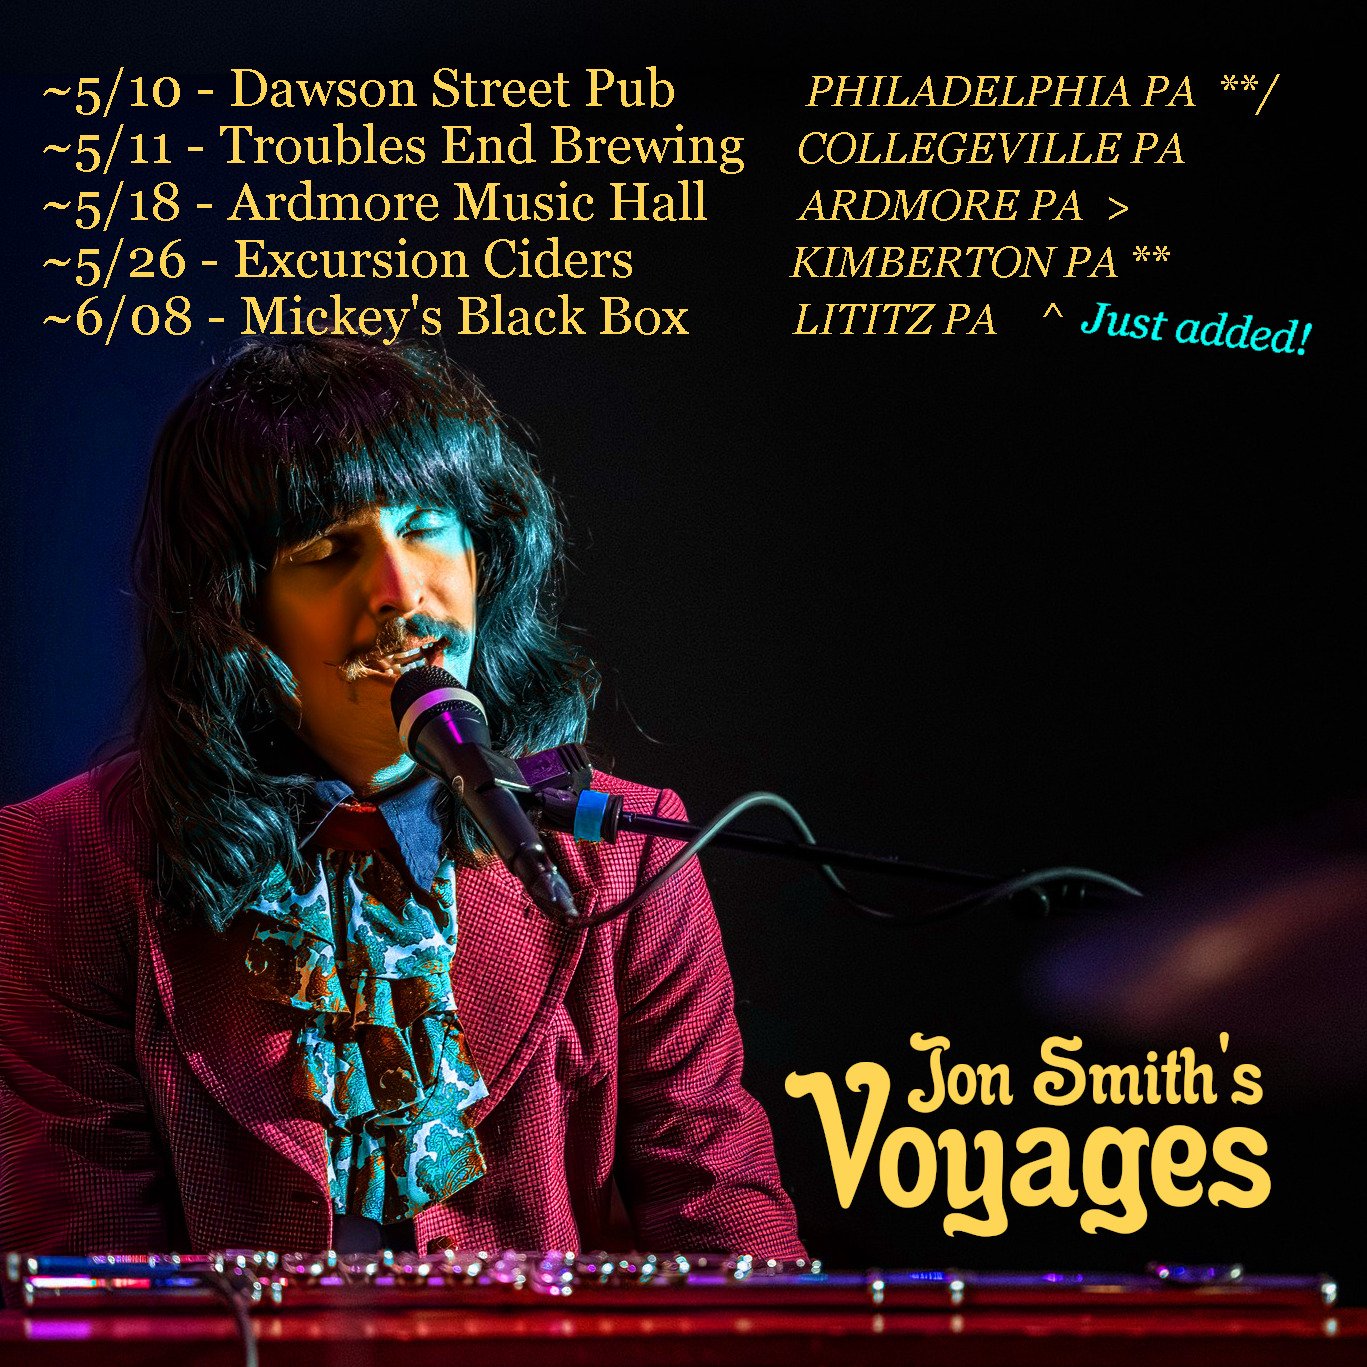 Philly area! There are two cool JSV shows this weekend! 
~5/10 - @dawsonstreetpub  𝟵𝗽𝗺  PHILADELPHIA PA **/
~5/11 - @troublesendbrewing  𝟵𝗽𝗺  COLLEGEVILLE PA
~5/18 - @ardmoremusichall  𝟭𝟭𝗮𝗺  ARDMORE PA &gt;
~5/26 - @excursionciders  𝟮:𝟯𝟬